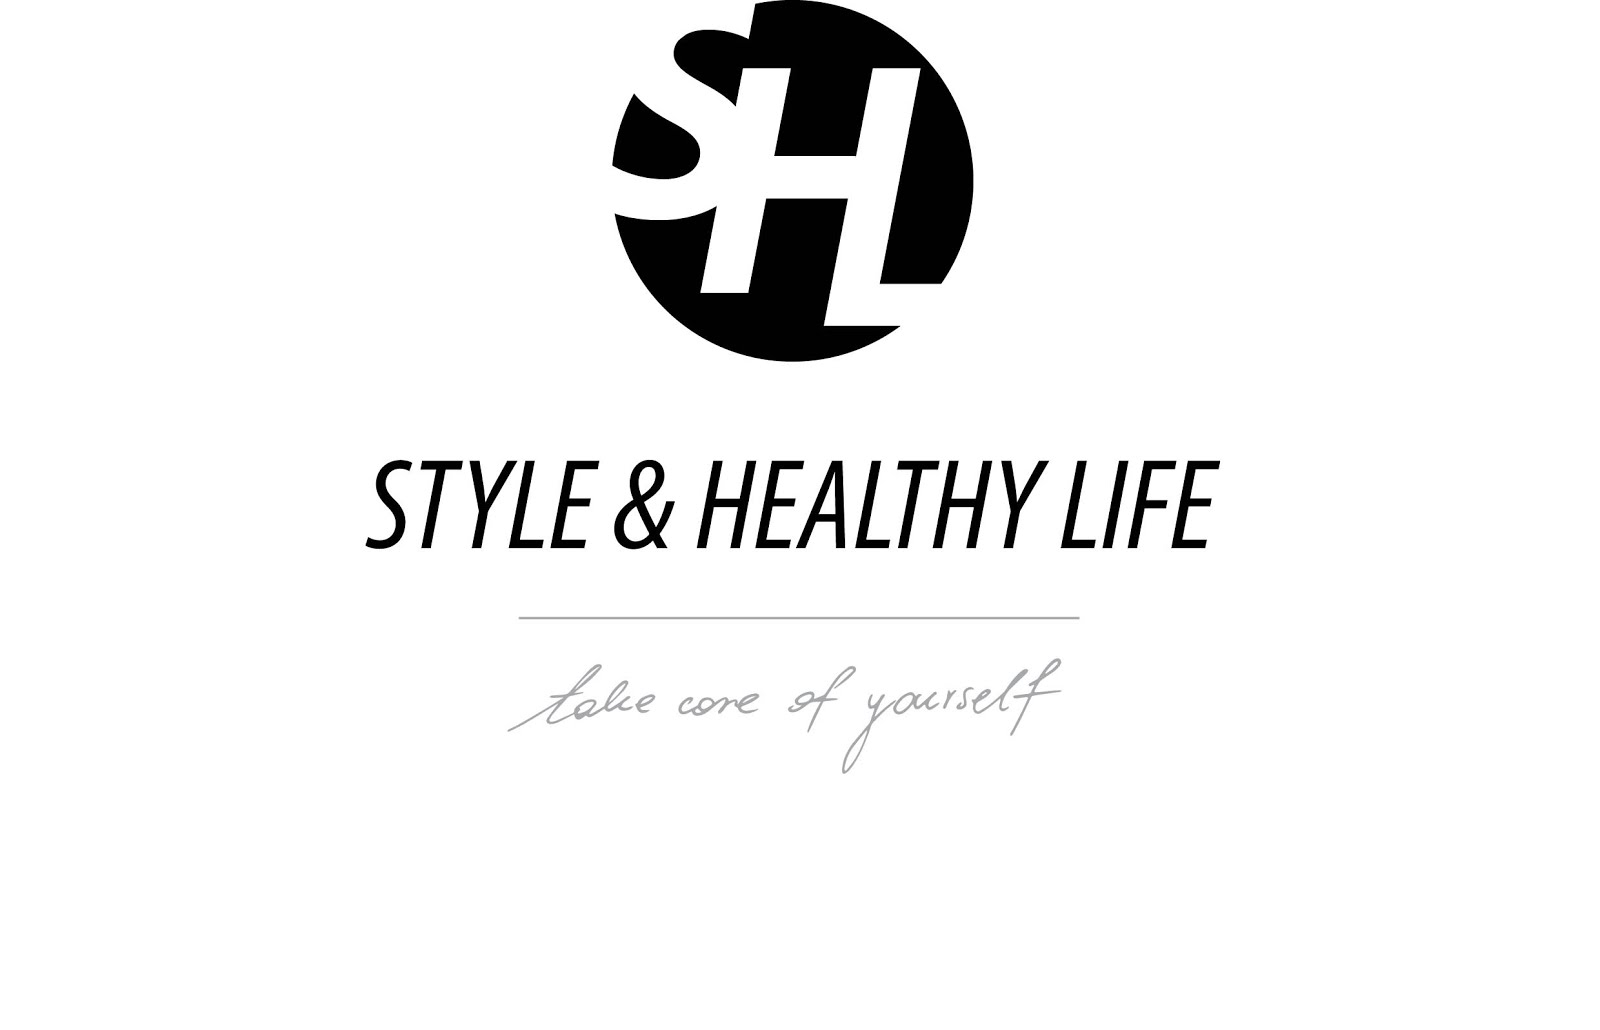 Style & Healthy Life